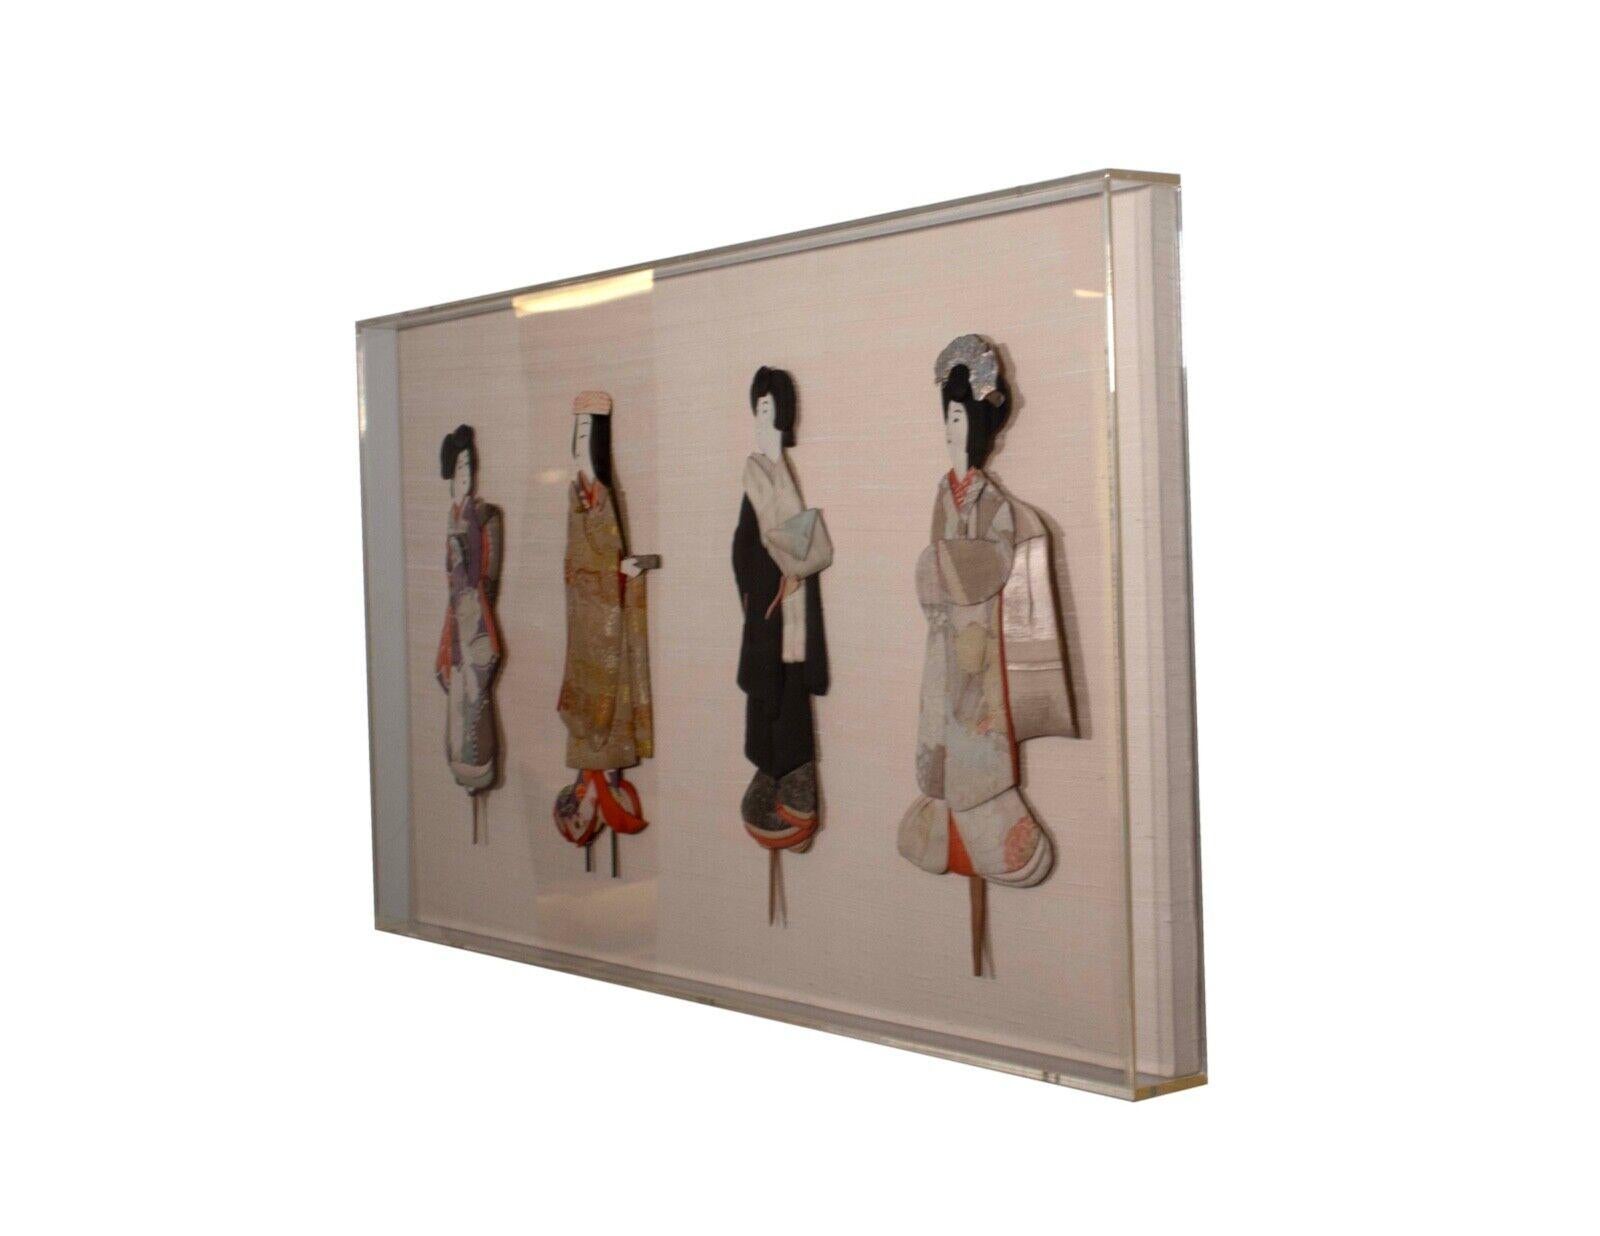 Antique Japanese Silk Brocade Oshie Art Geisha Puppet Dolls in Shadow Box Frame In Good Condition For Sale In Keego Harbor, MI